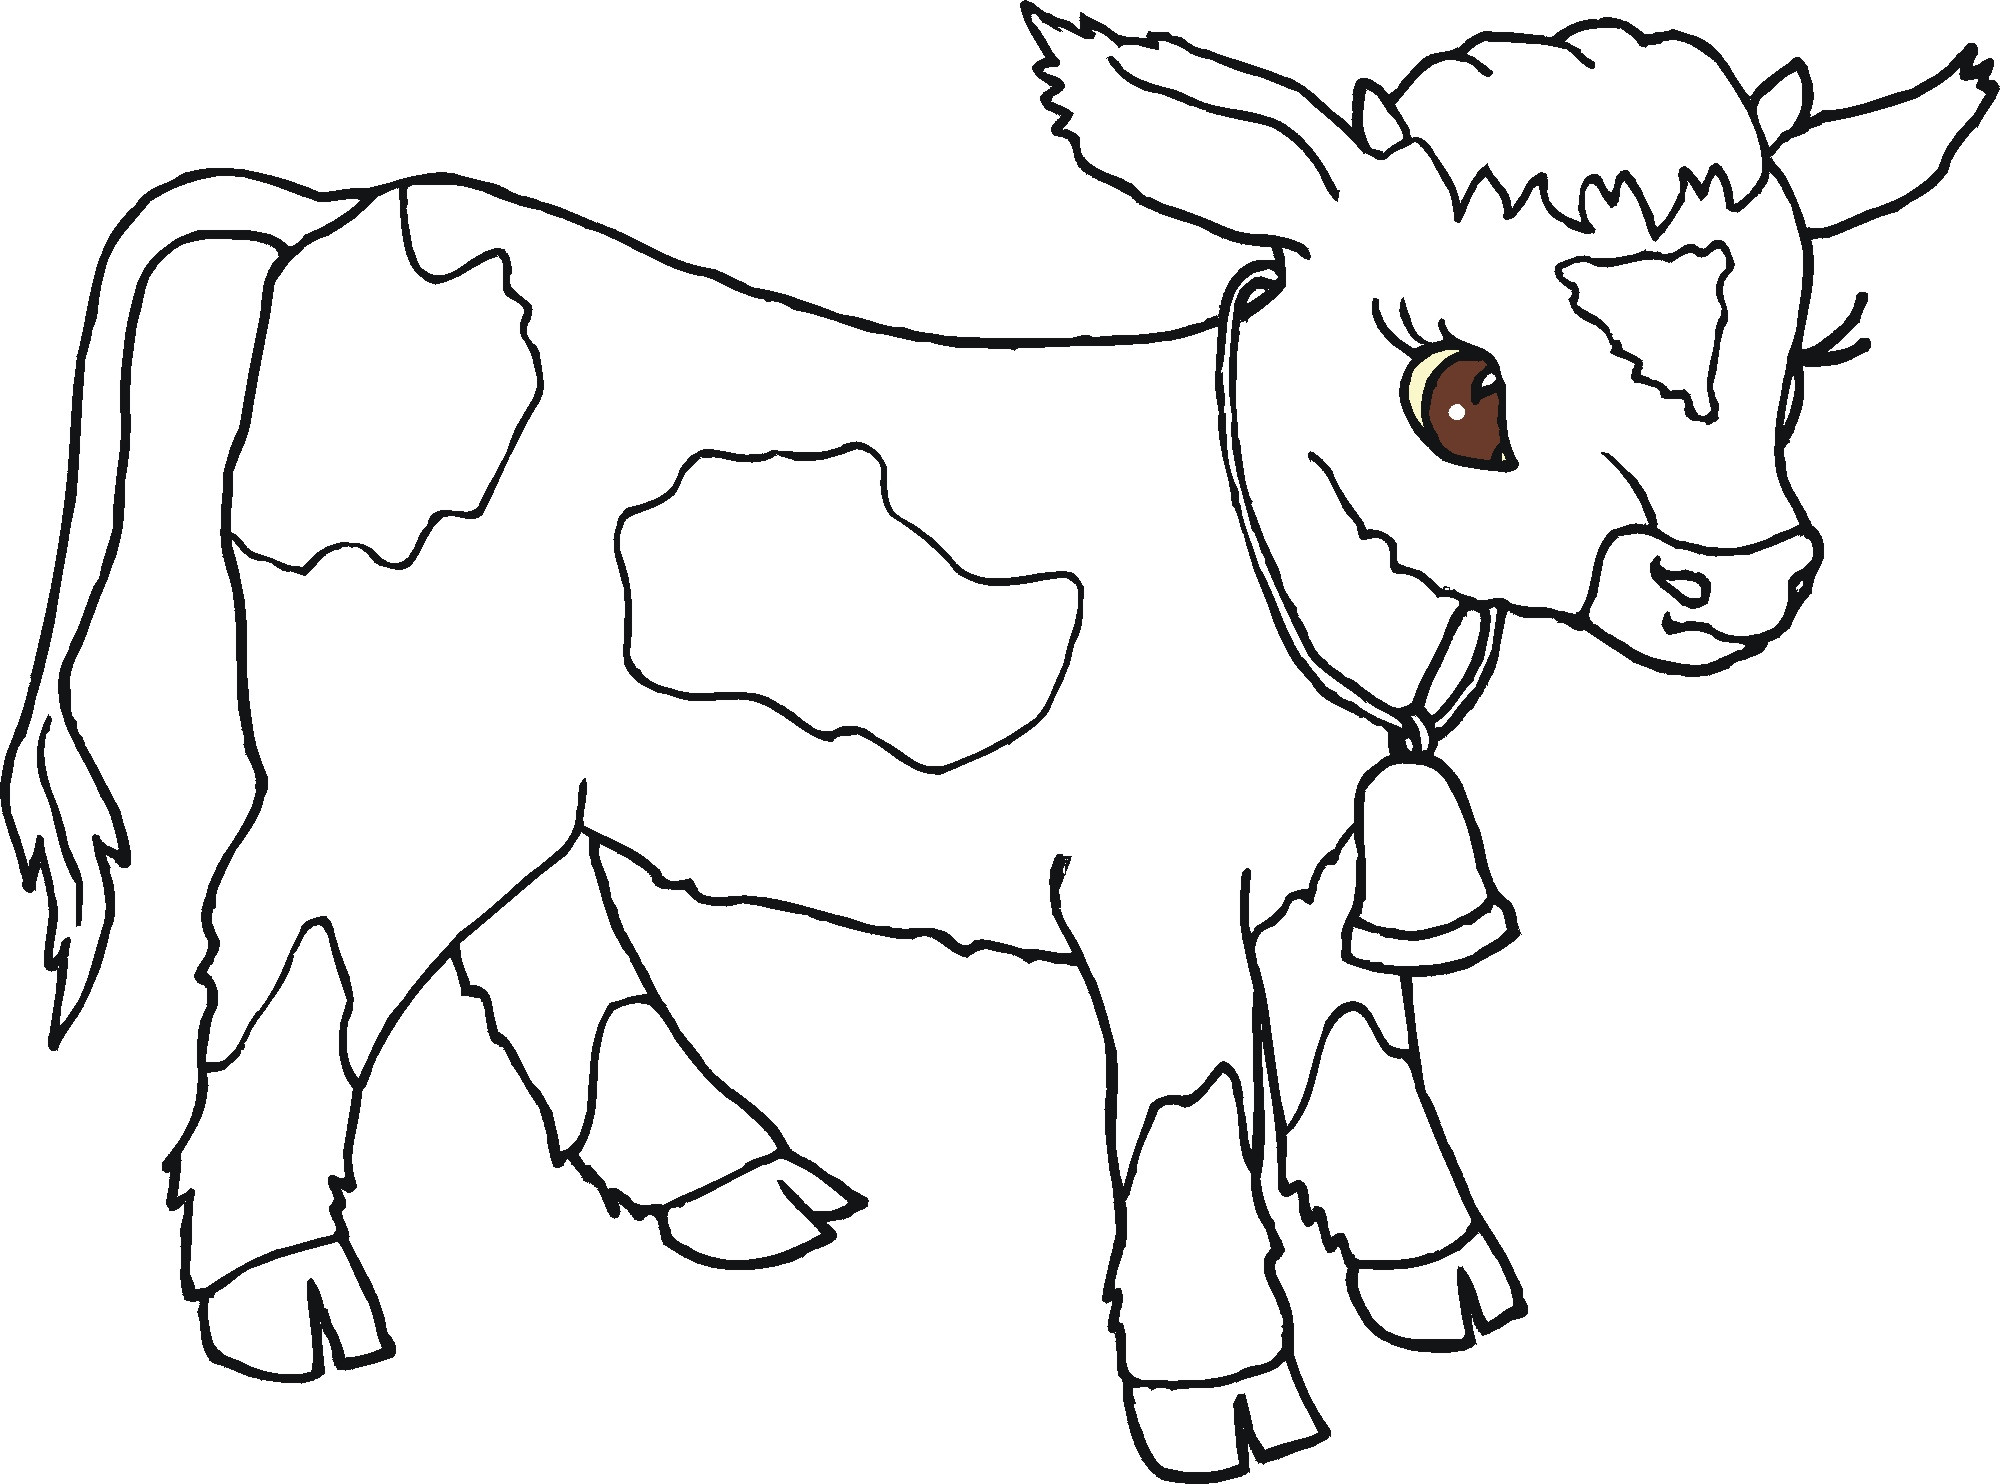 Animals Coloring Pages For Kids
 Animal Coloring Pages – Children s Best Activities